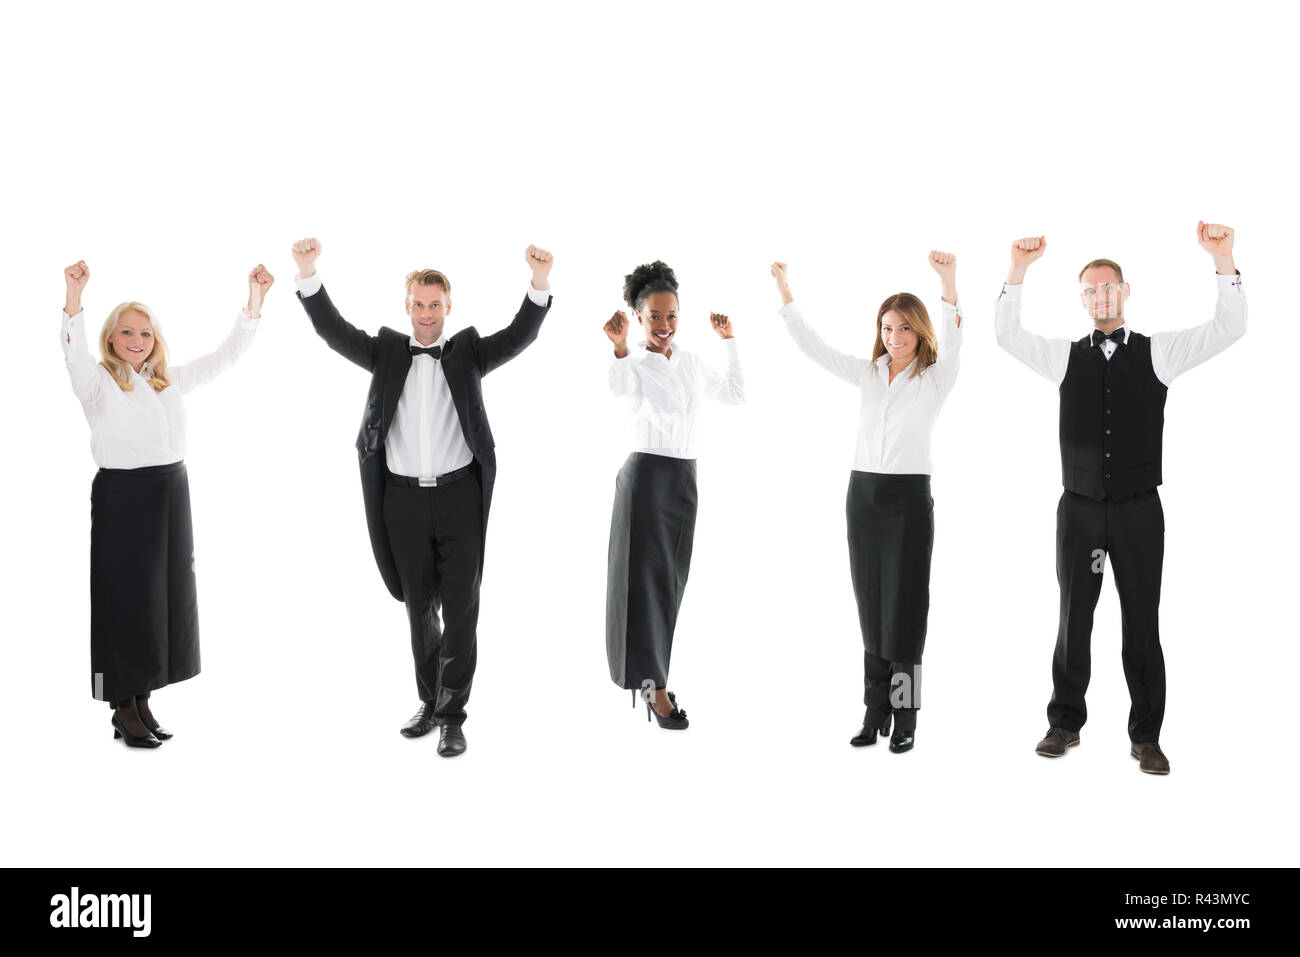 Happy Waiter And Waitresses Standing With Arms Raised Stock Photo